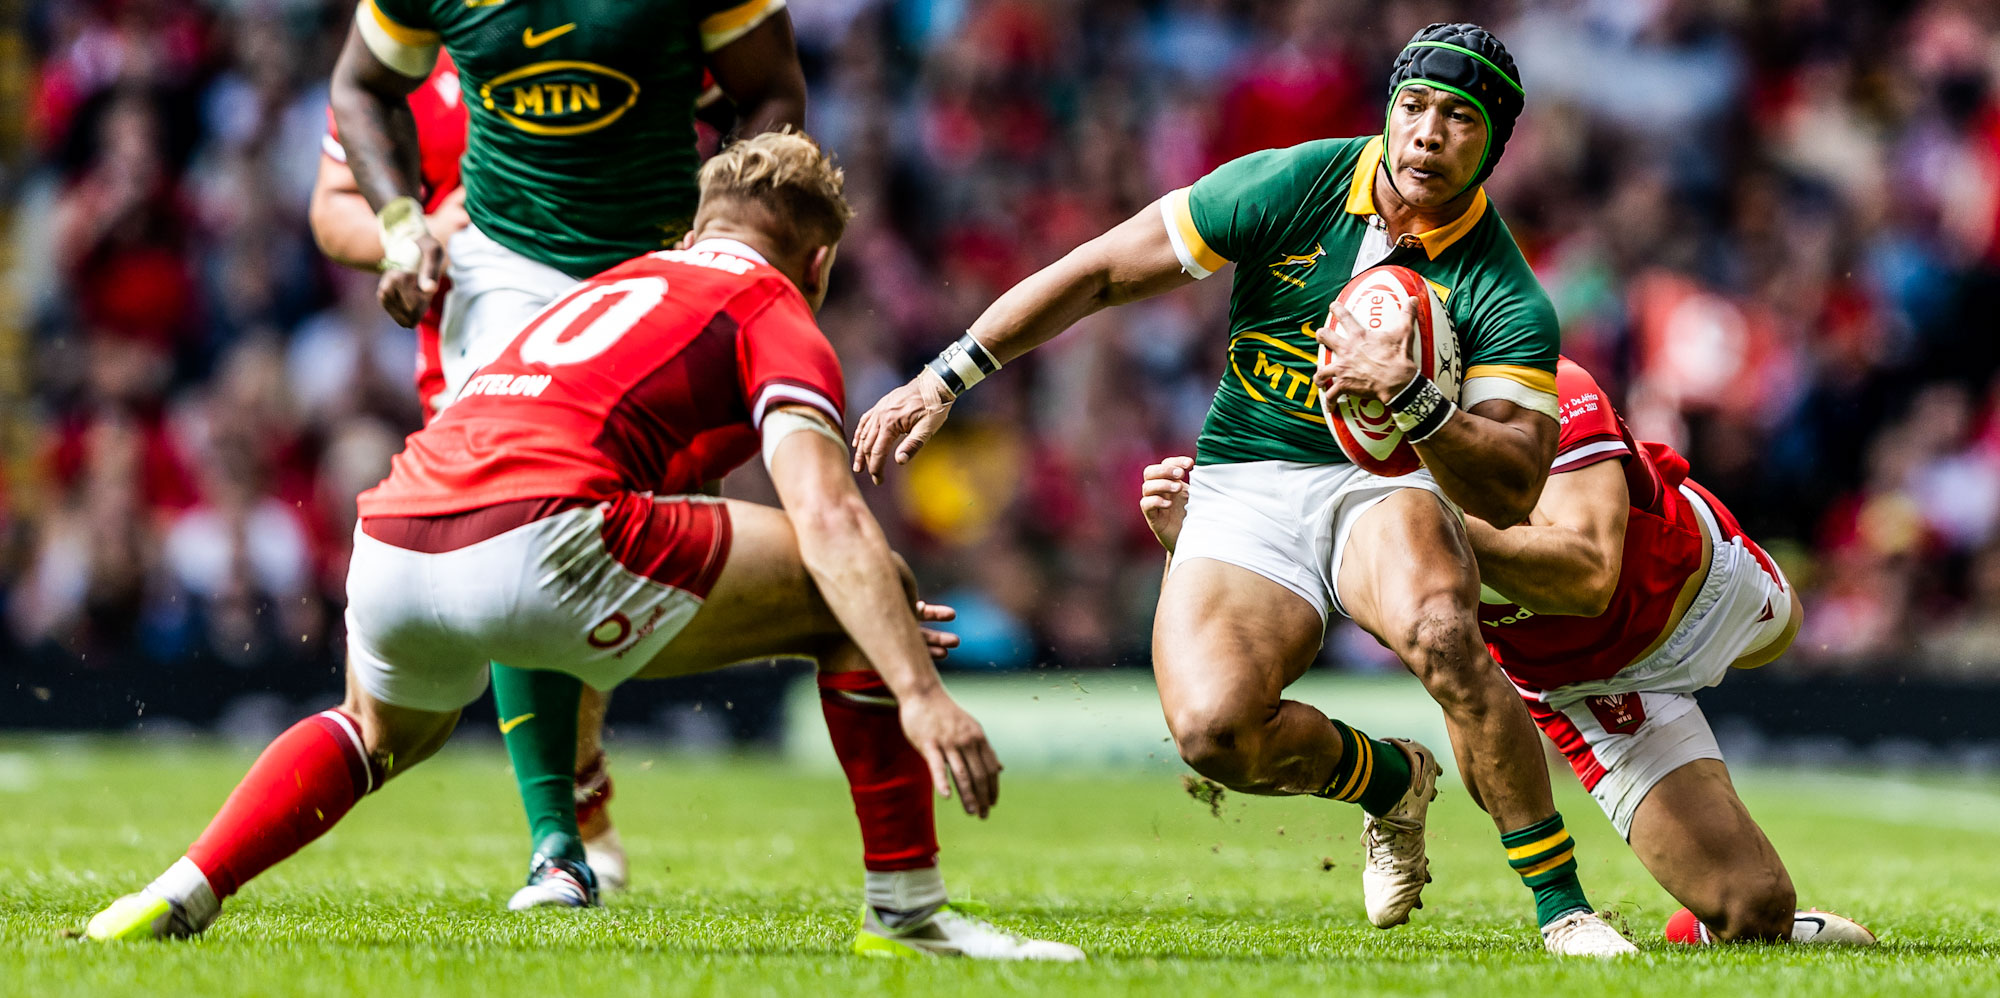 Cheslin Kolbe in action against Wales in Cardiff a few weeks ago.